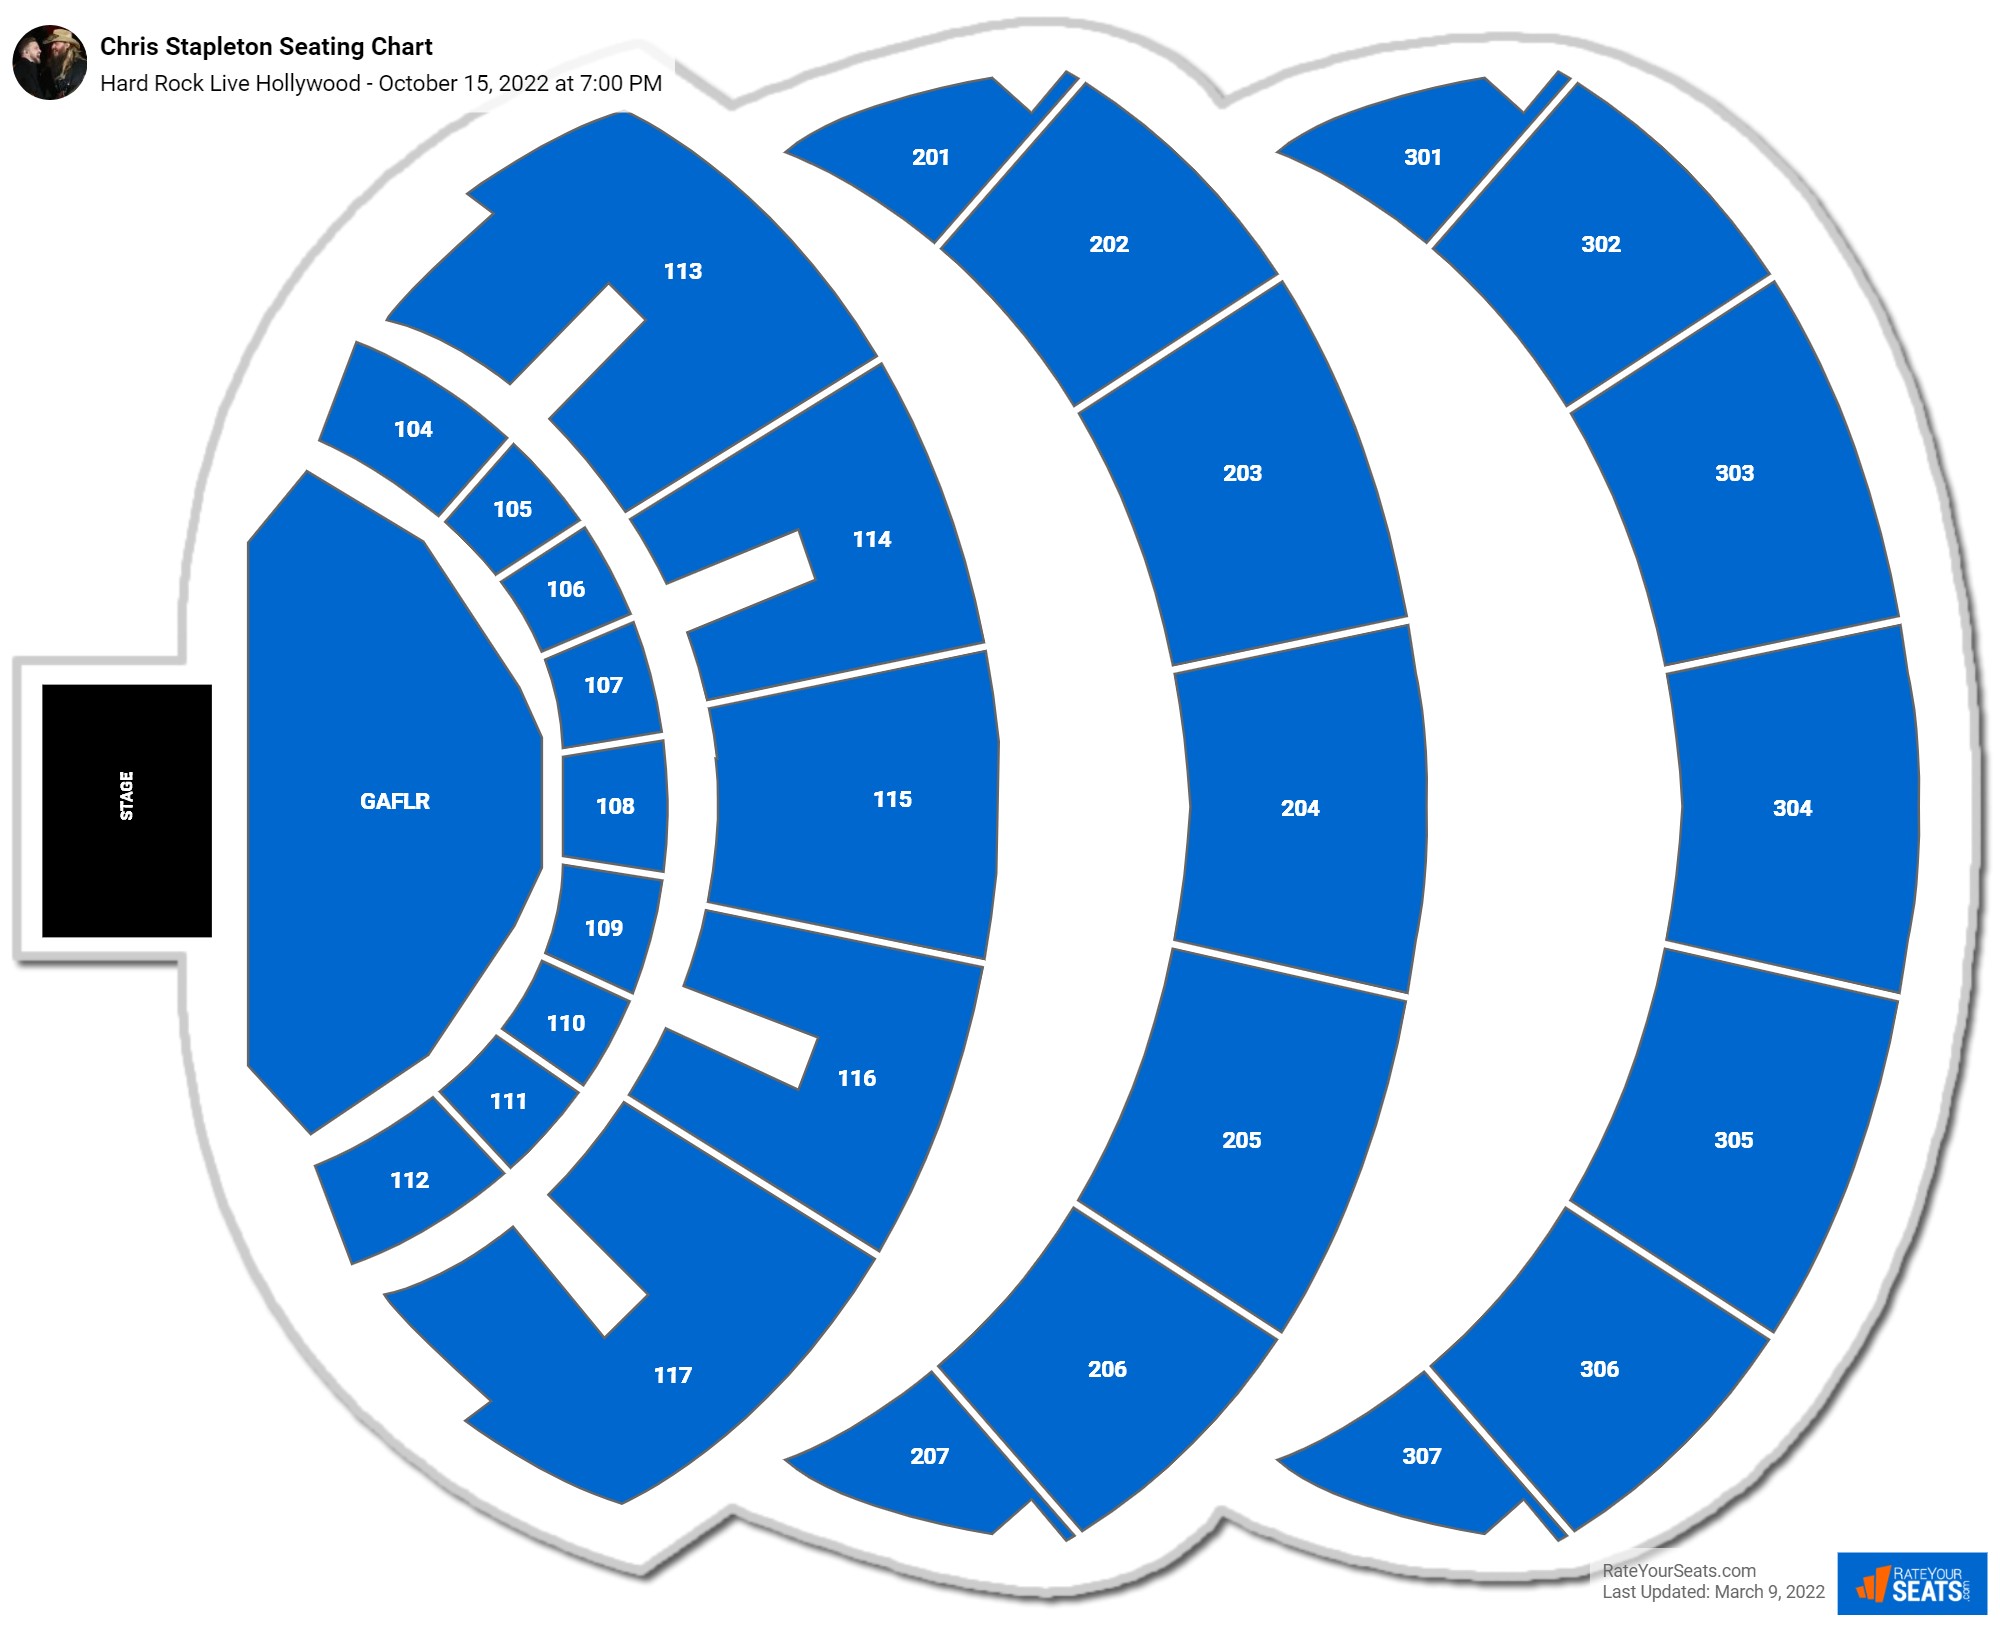 Hard Rock Live Hollywood Seating Chart - RateYourSeats.com